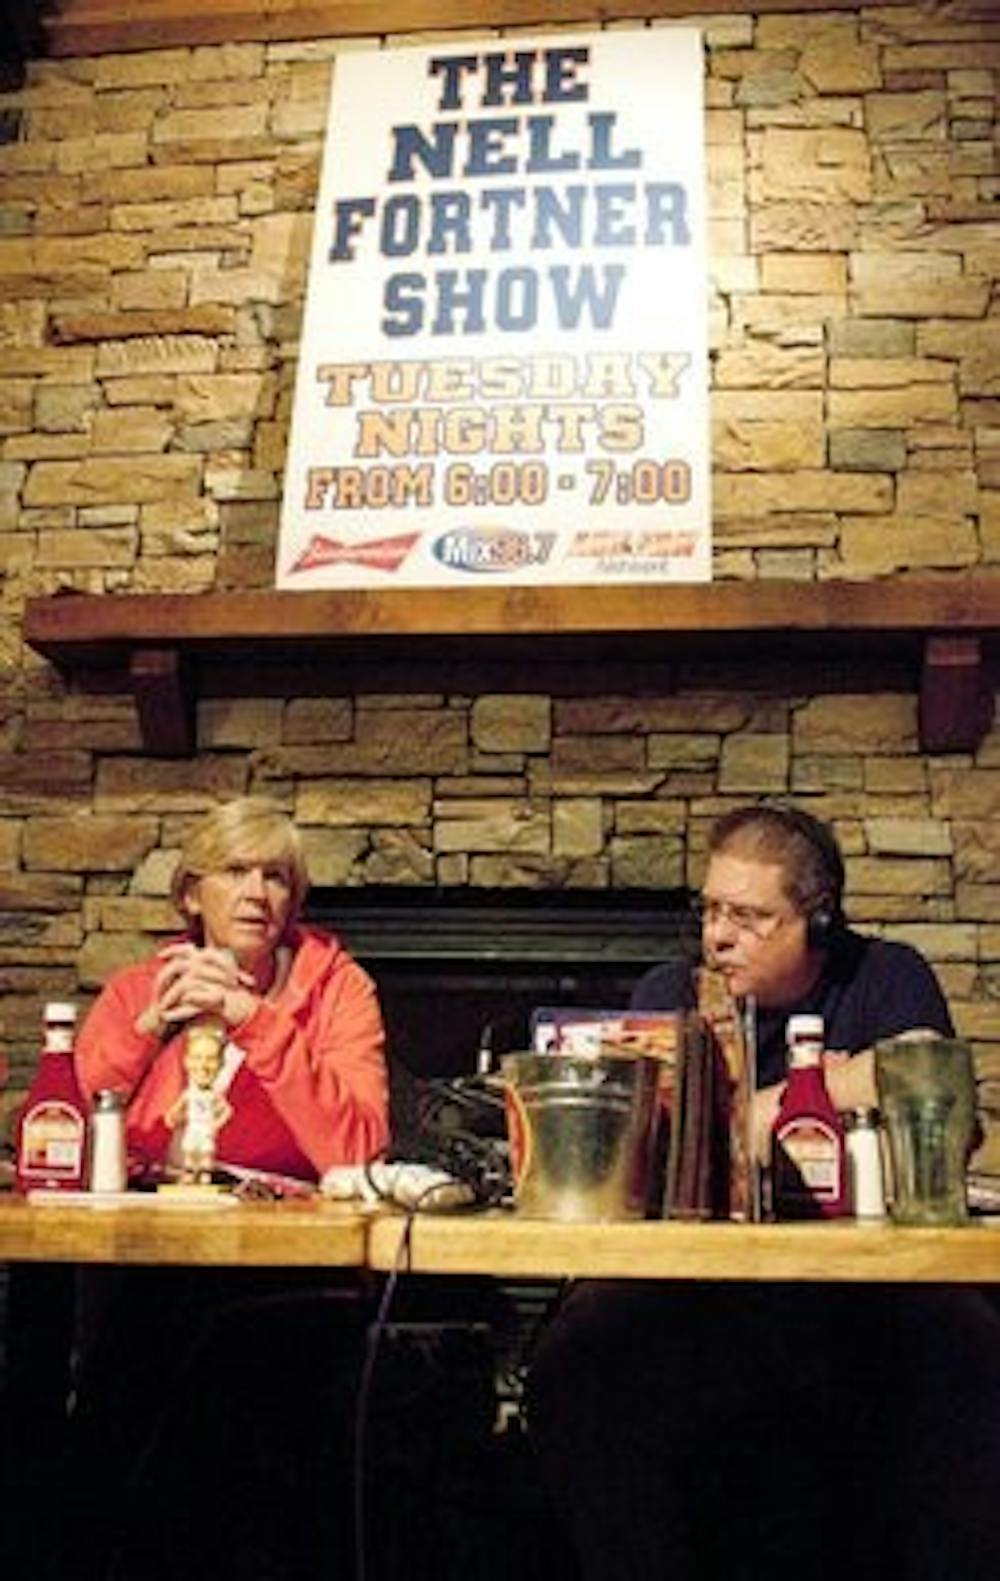 Women's basketball coach Nell Fortner talks on her radio show at Logan's with Mix 96.7's Andy Burcham. (Emily Adams / Photo Editor)